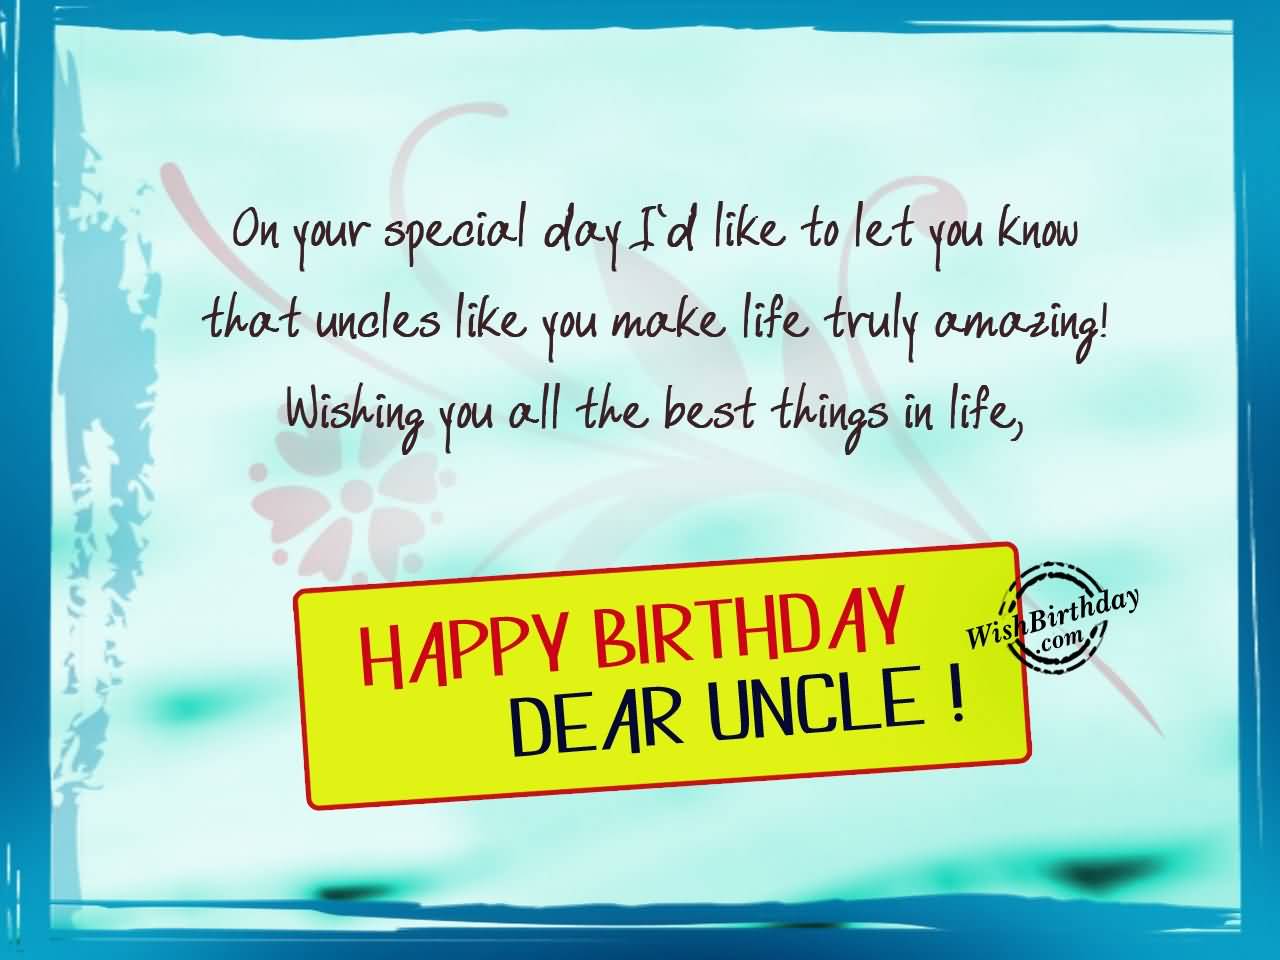 On your special day I'd like to let you know that Happy Birthday dear Uncle coolest wish messages for you